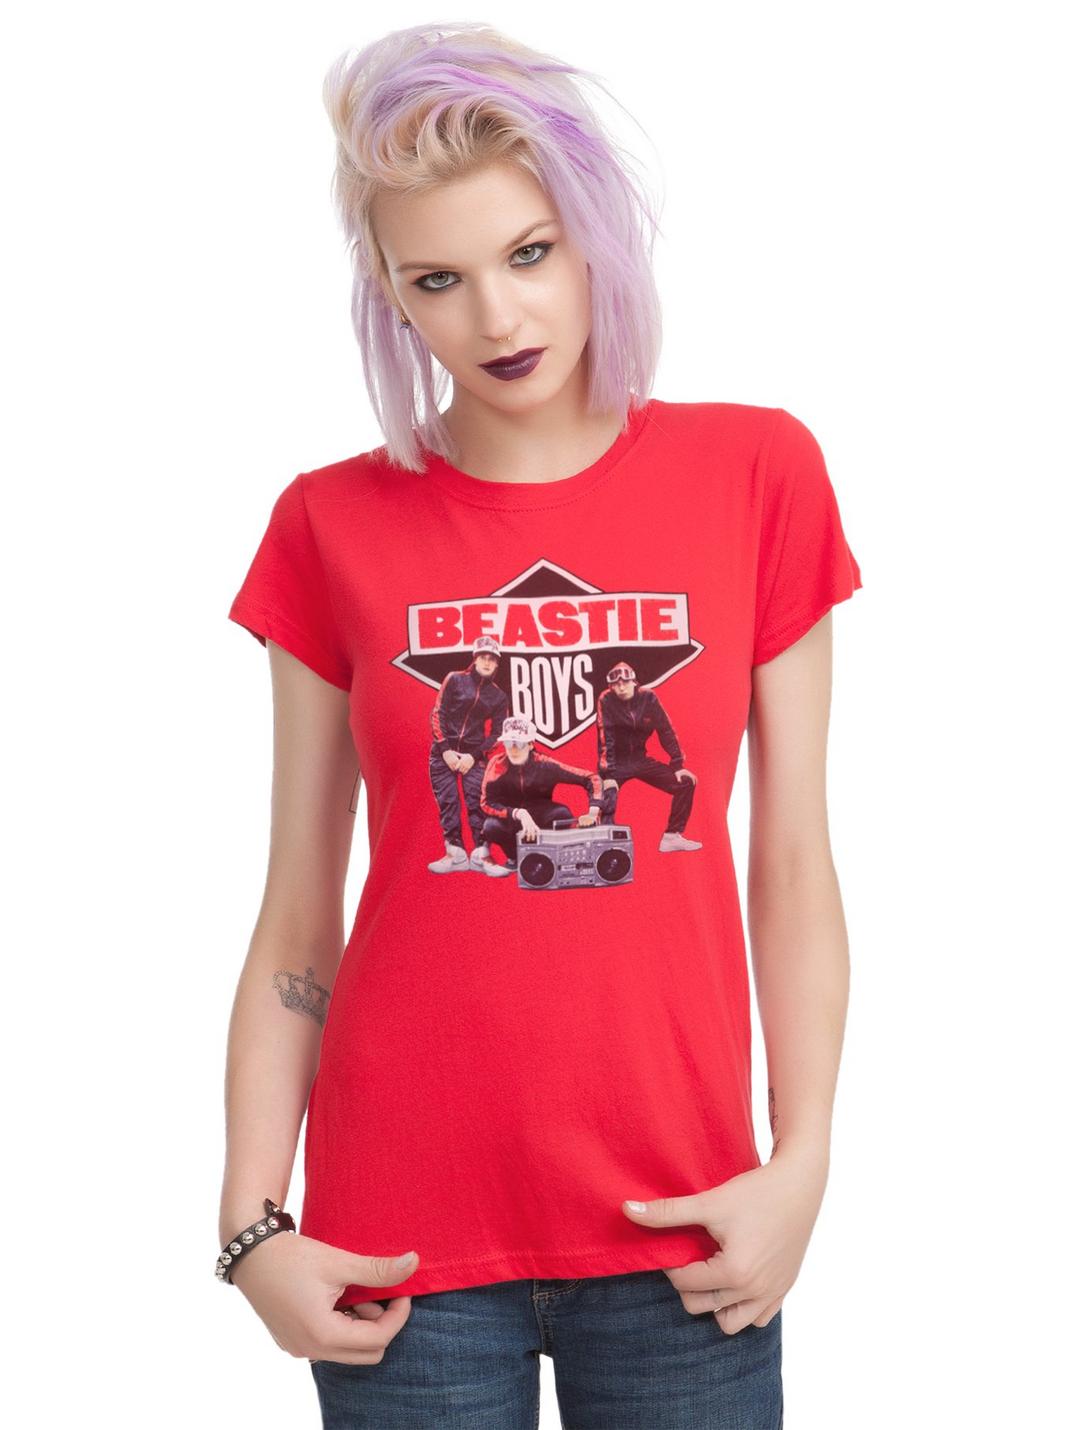 Beastie Boys Solid Gold Hits Girls T-Shirt, RED, hi-res